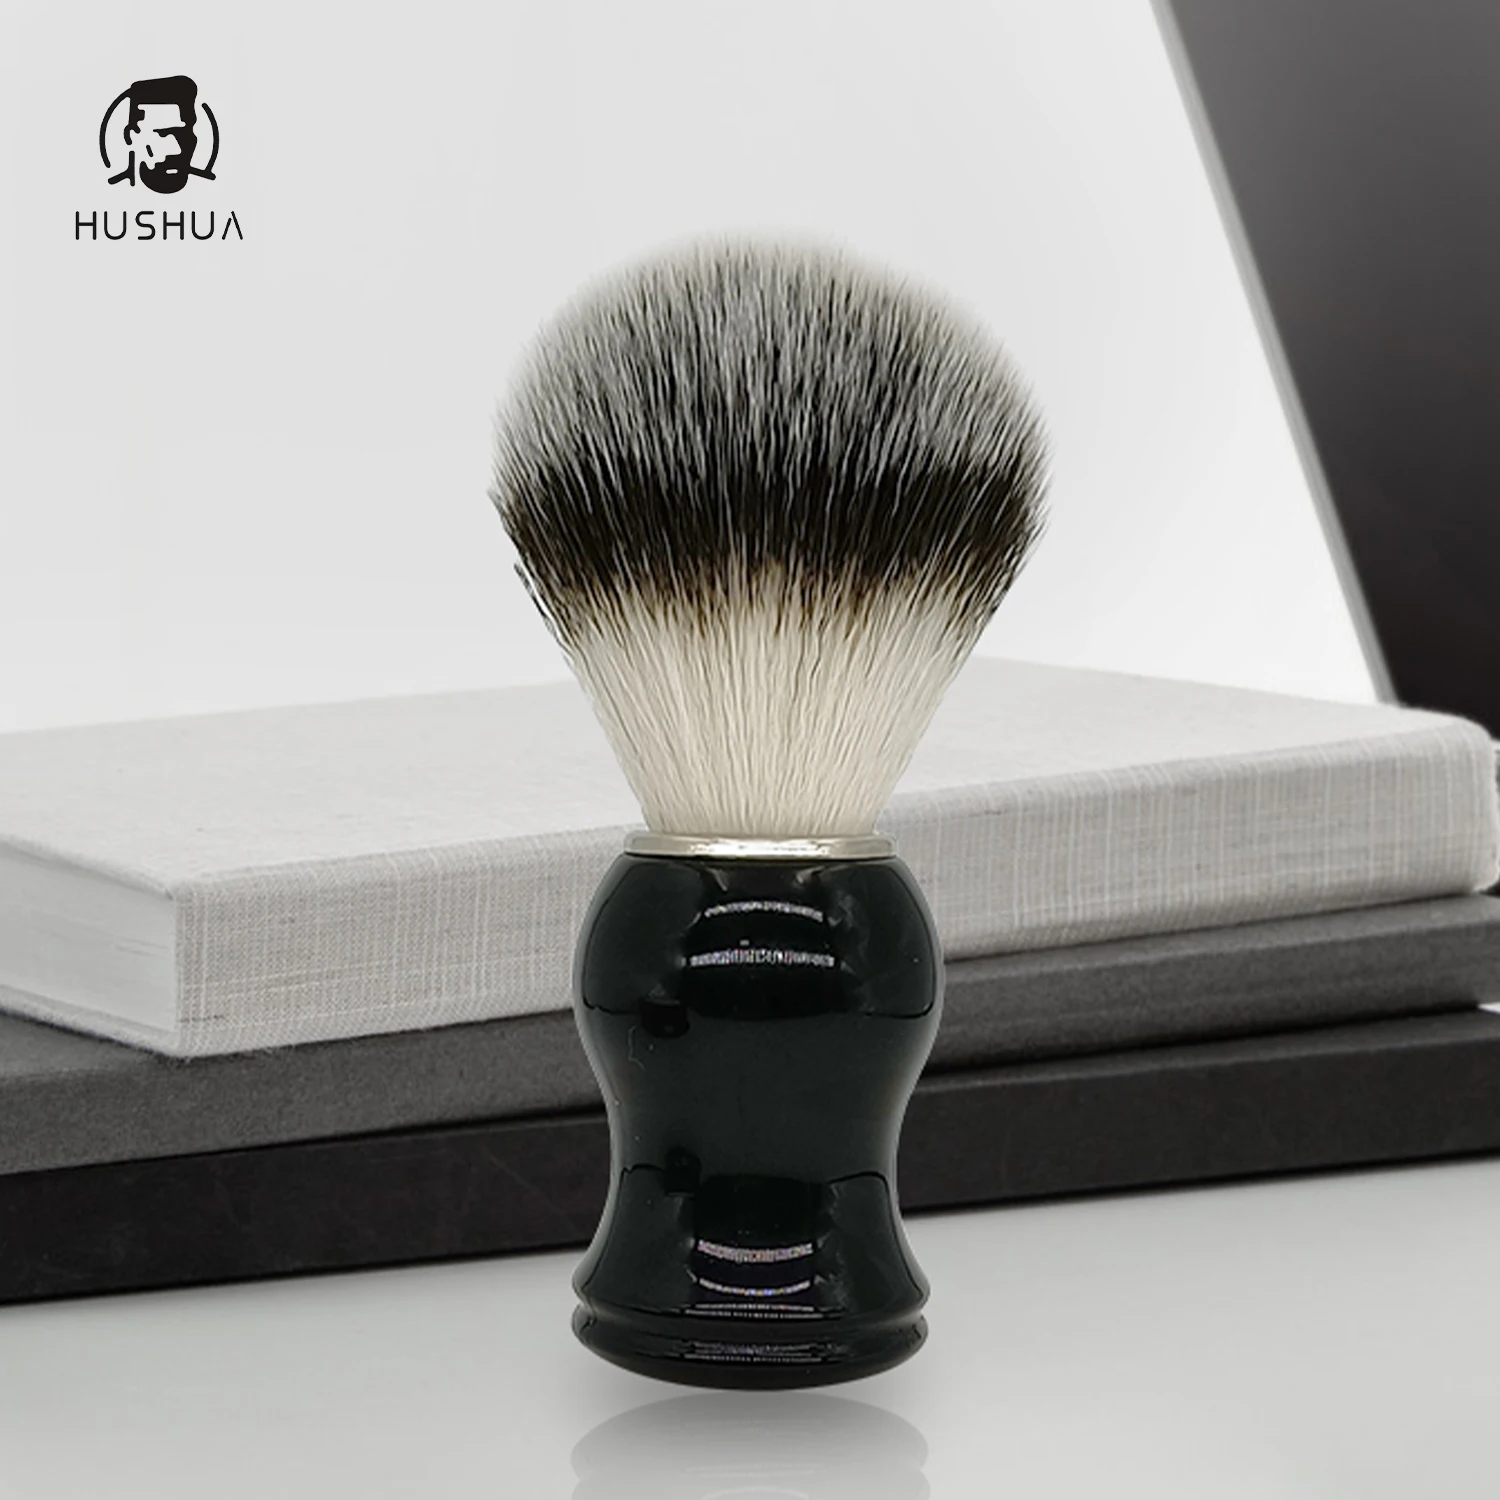 

Hushua ABS Handmade Shaving Brush For Men With Badger Hair Knot 21mm, Can Be Customized LOGO,Gift For Dad Husband